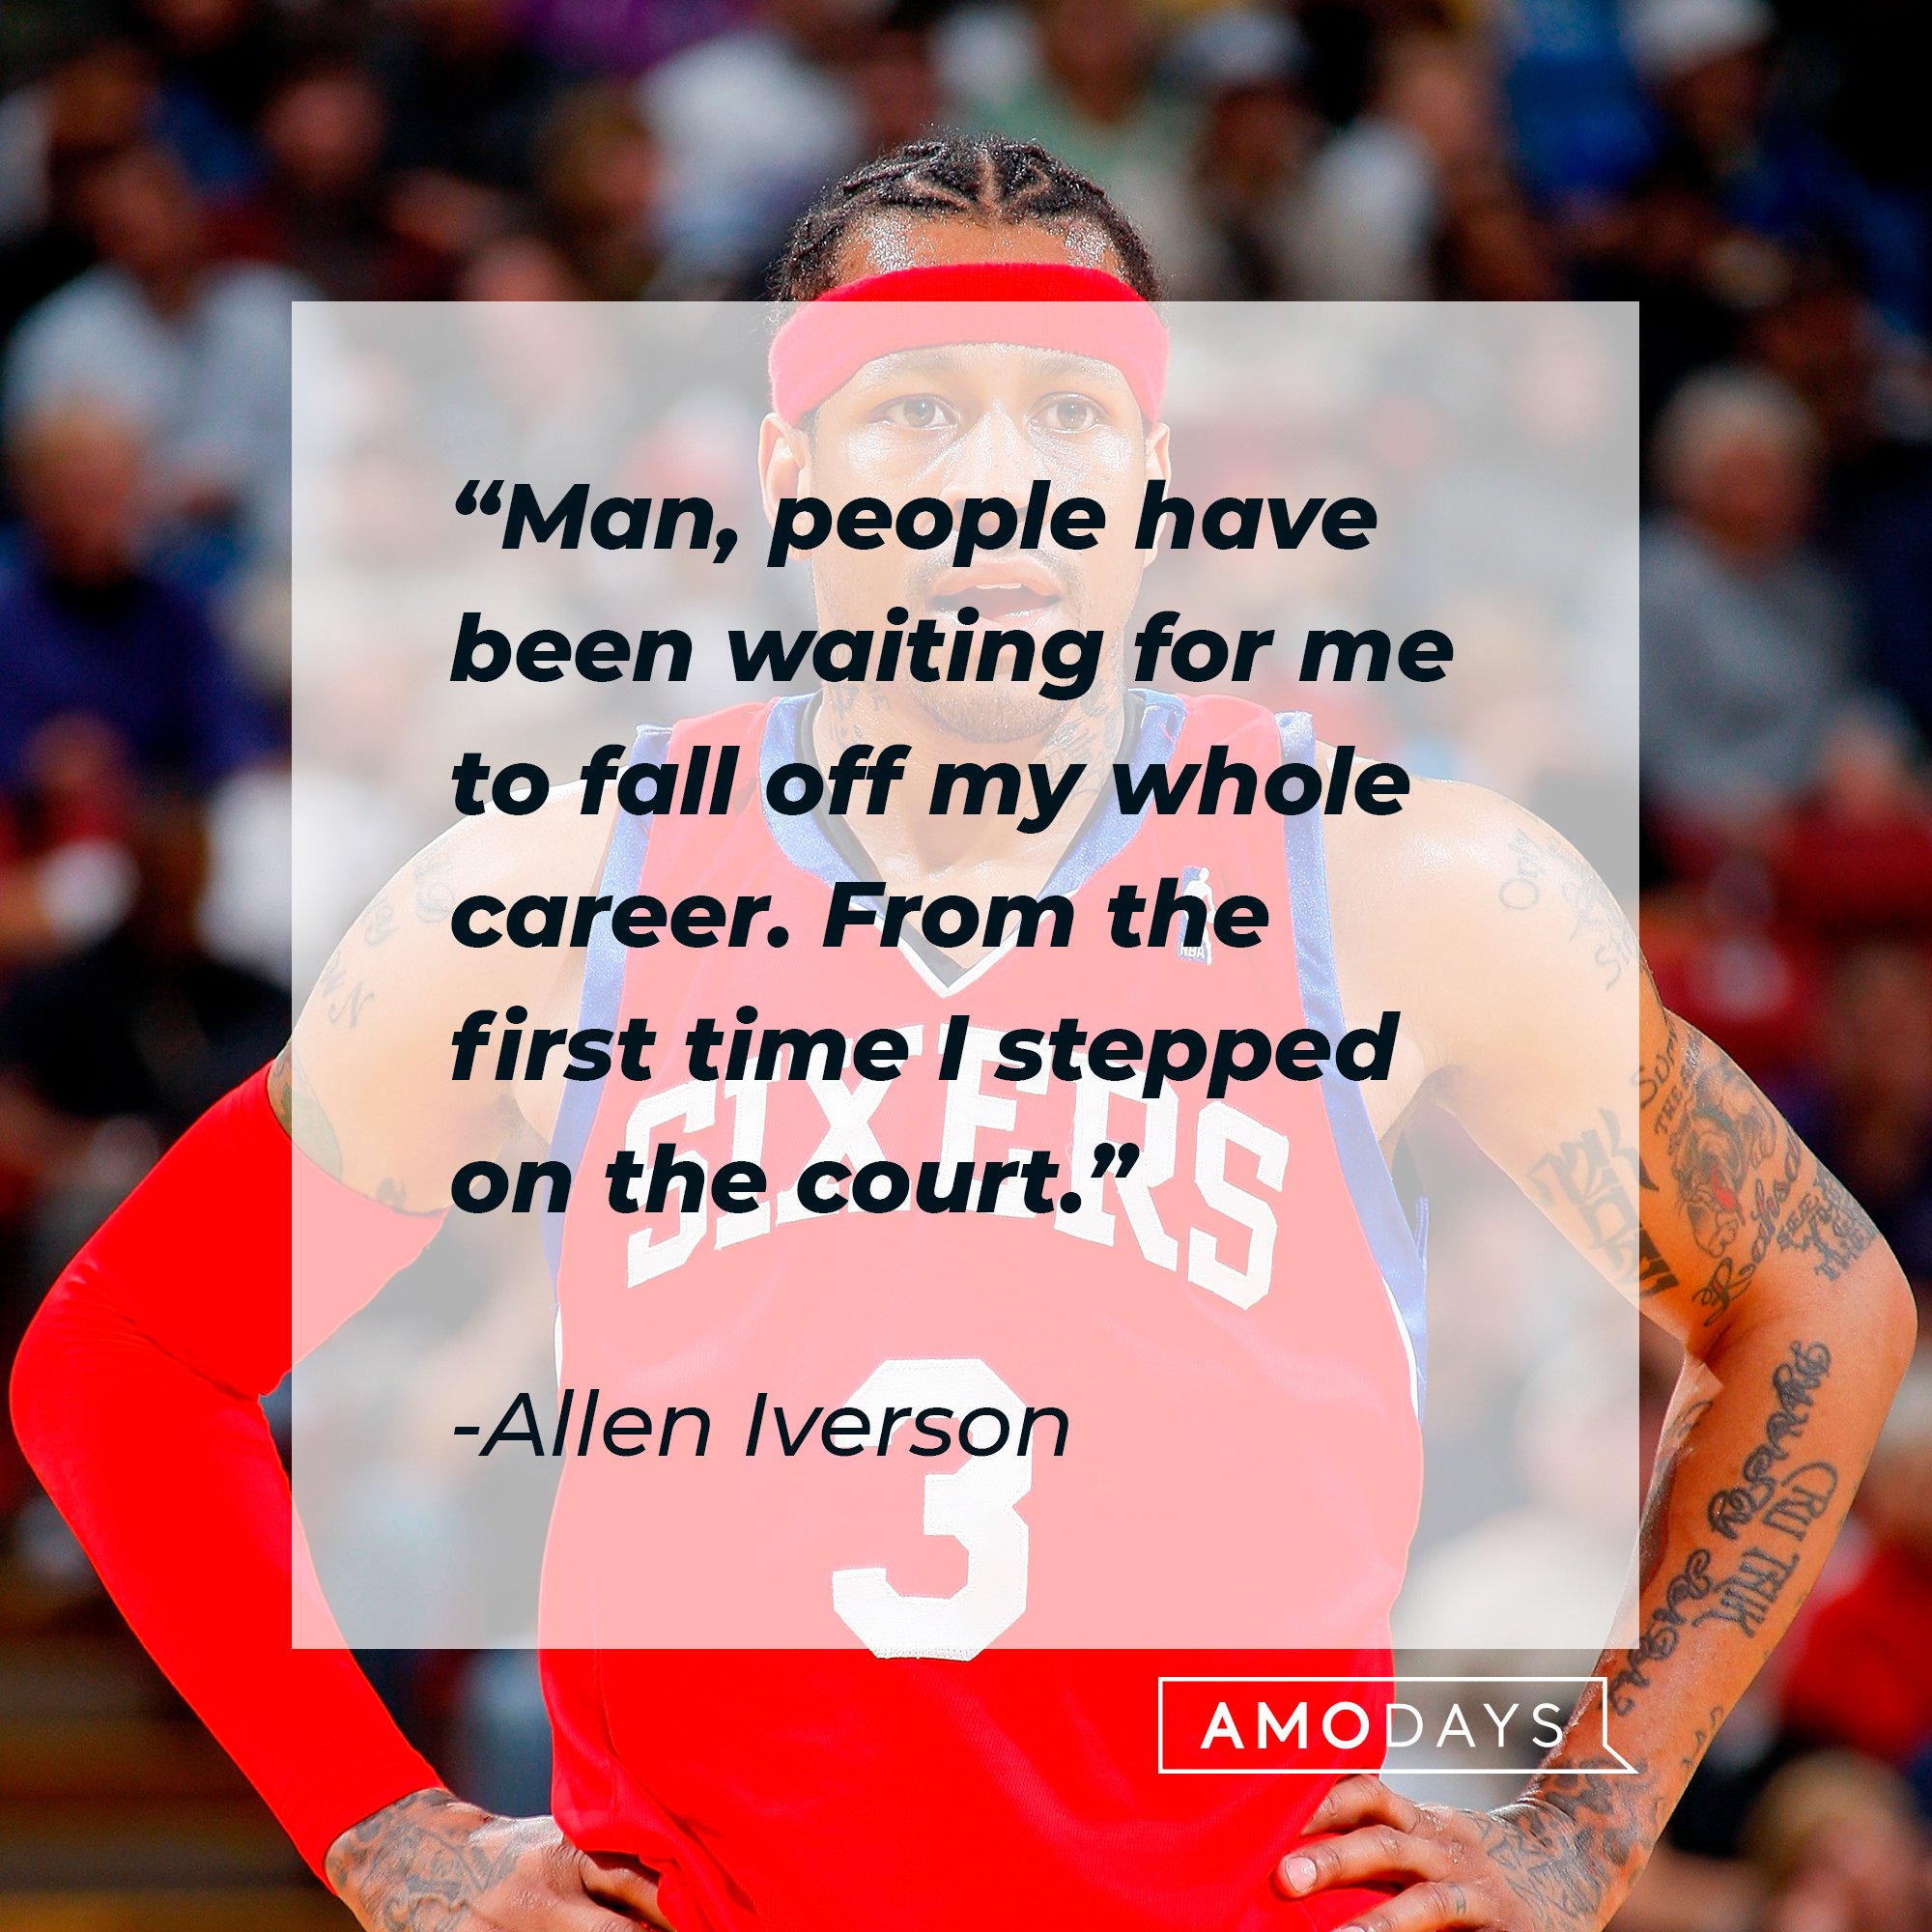 Allen Iverson's quote: "Man, people have been waiting for me to fall off my whole career. From the first time I stepped on the court." | Image: AmoDays